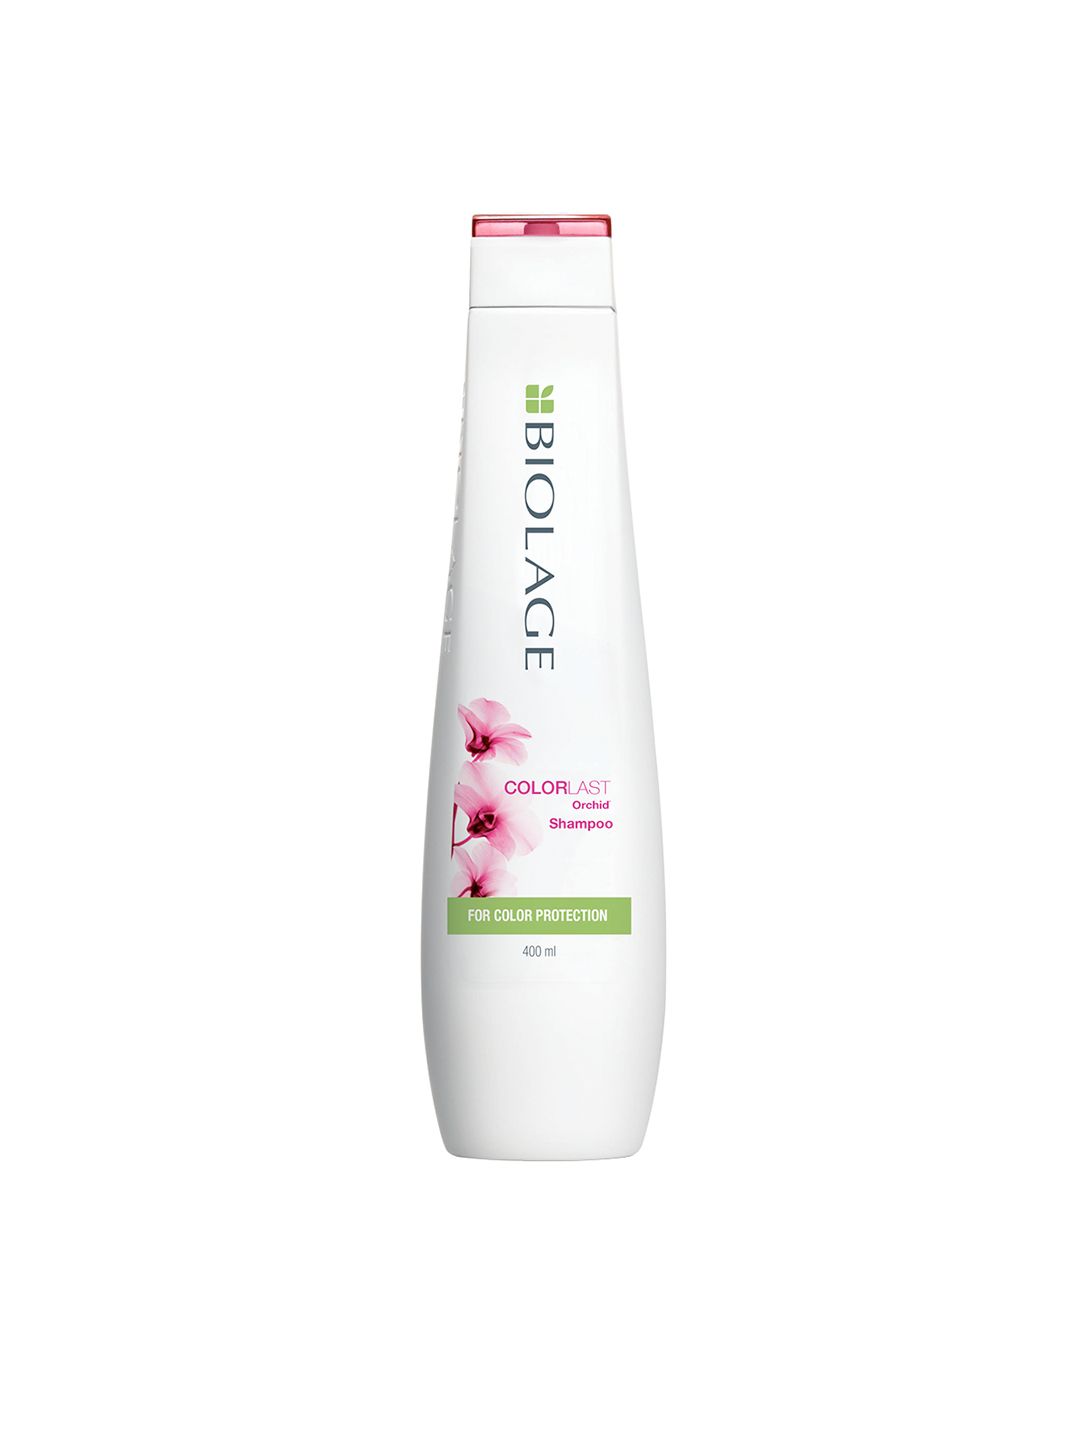 Biolage Color Last Orchid Shampoo for Color Protection - 400 ml Price in India